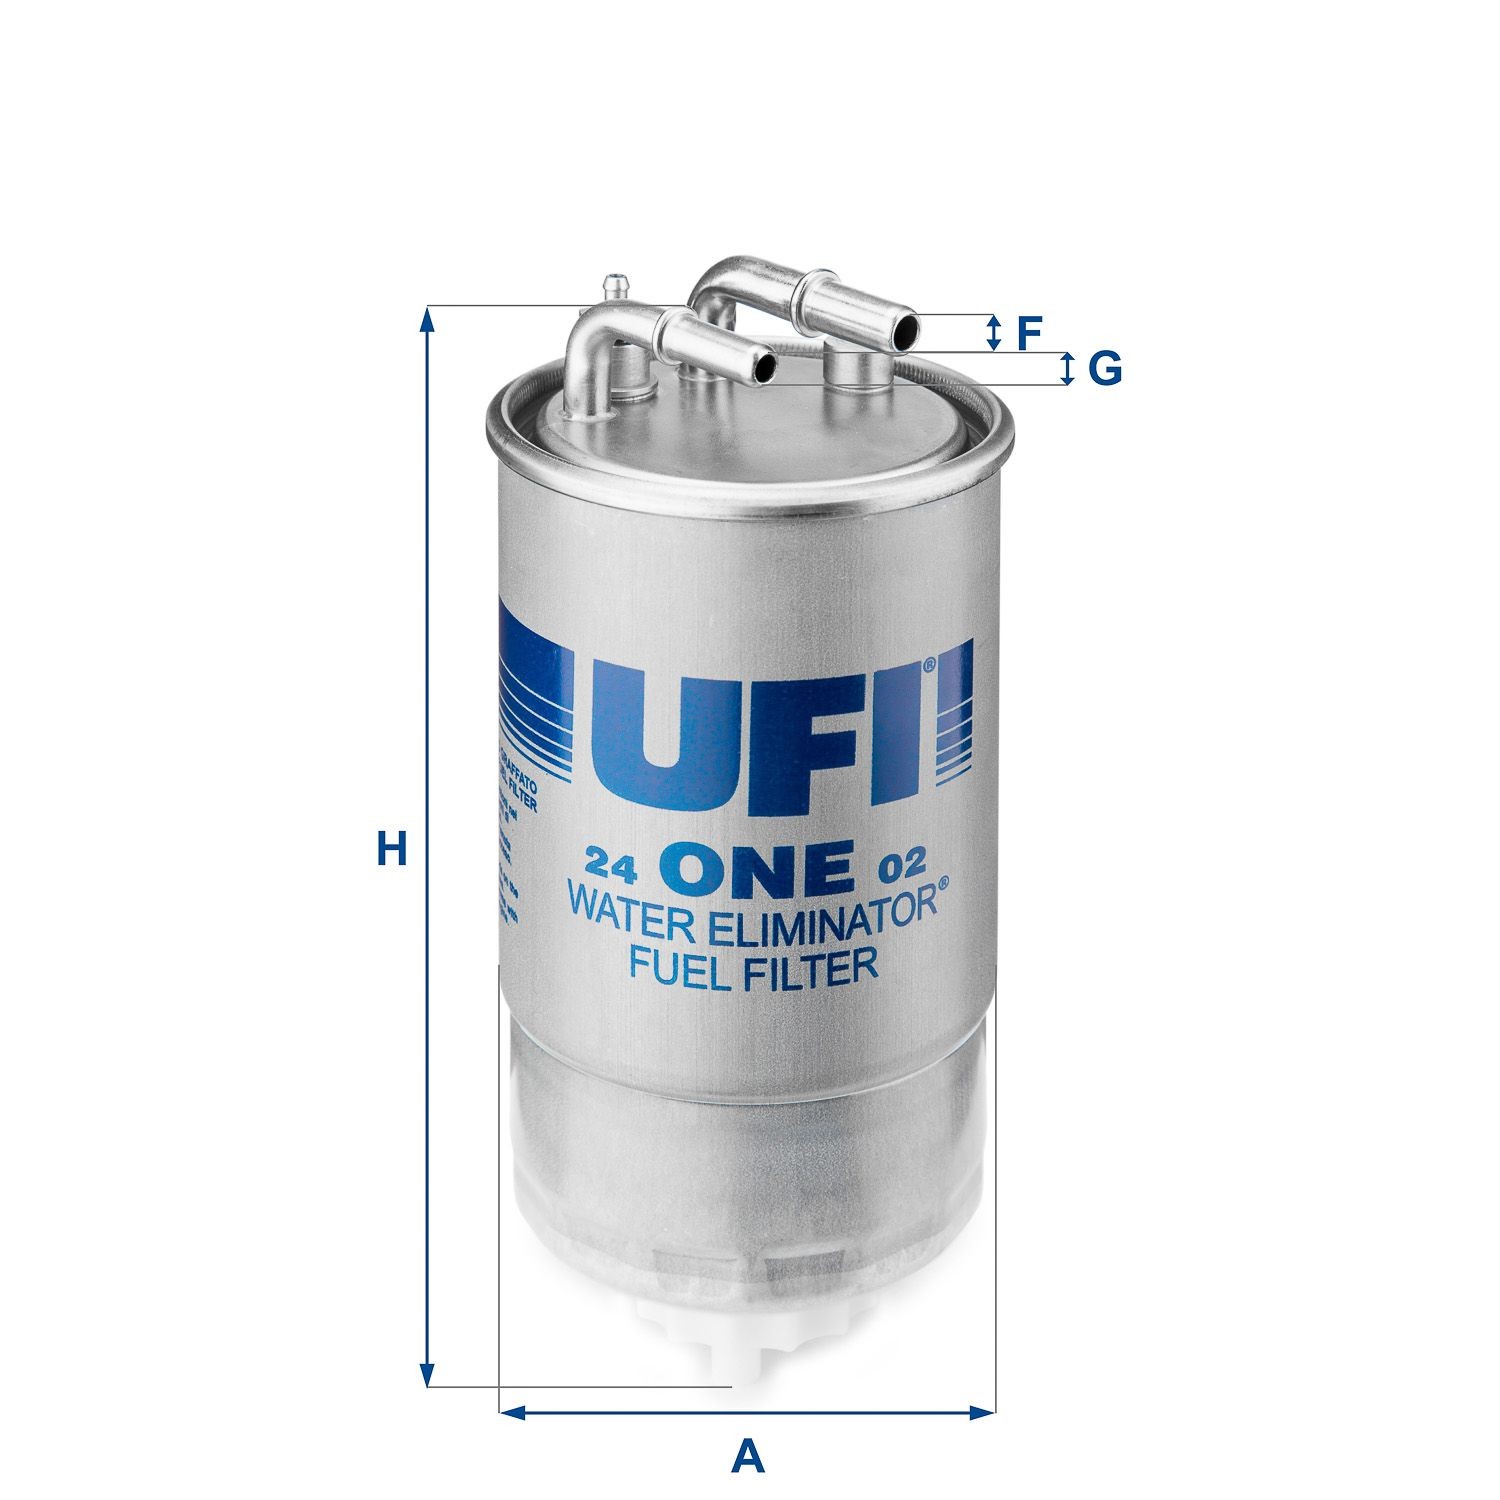 UFI 24.ONE.02 Fuel filter 8 13 059